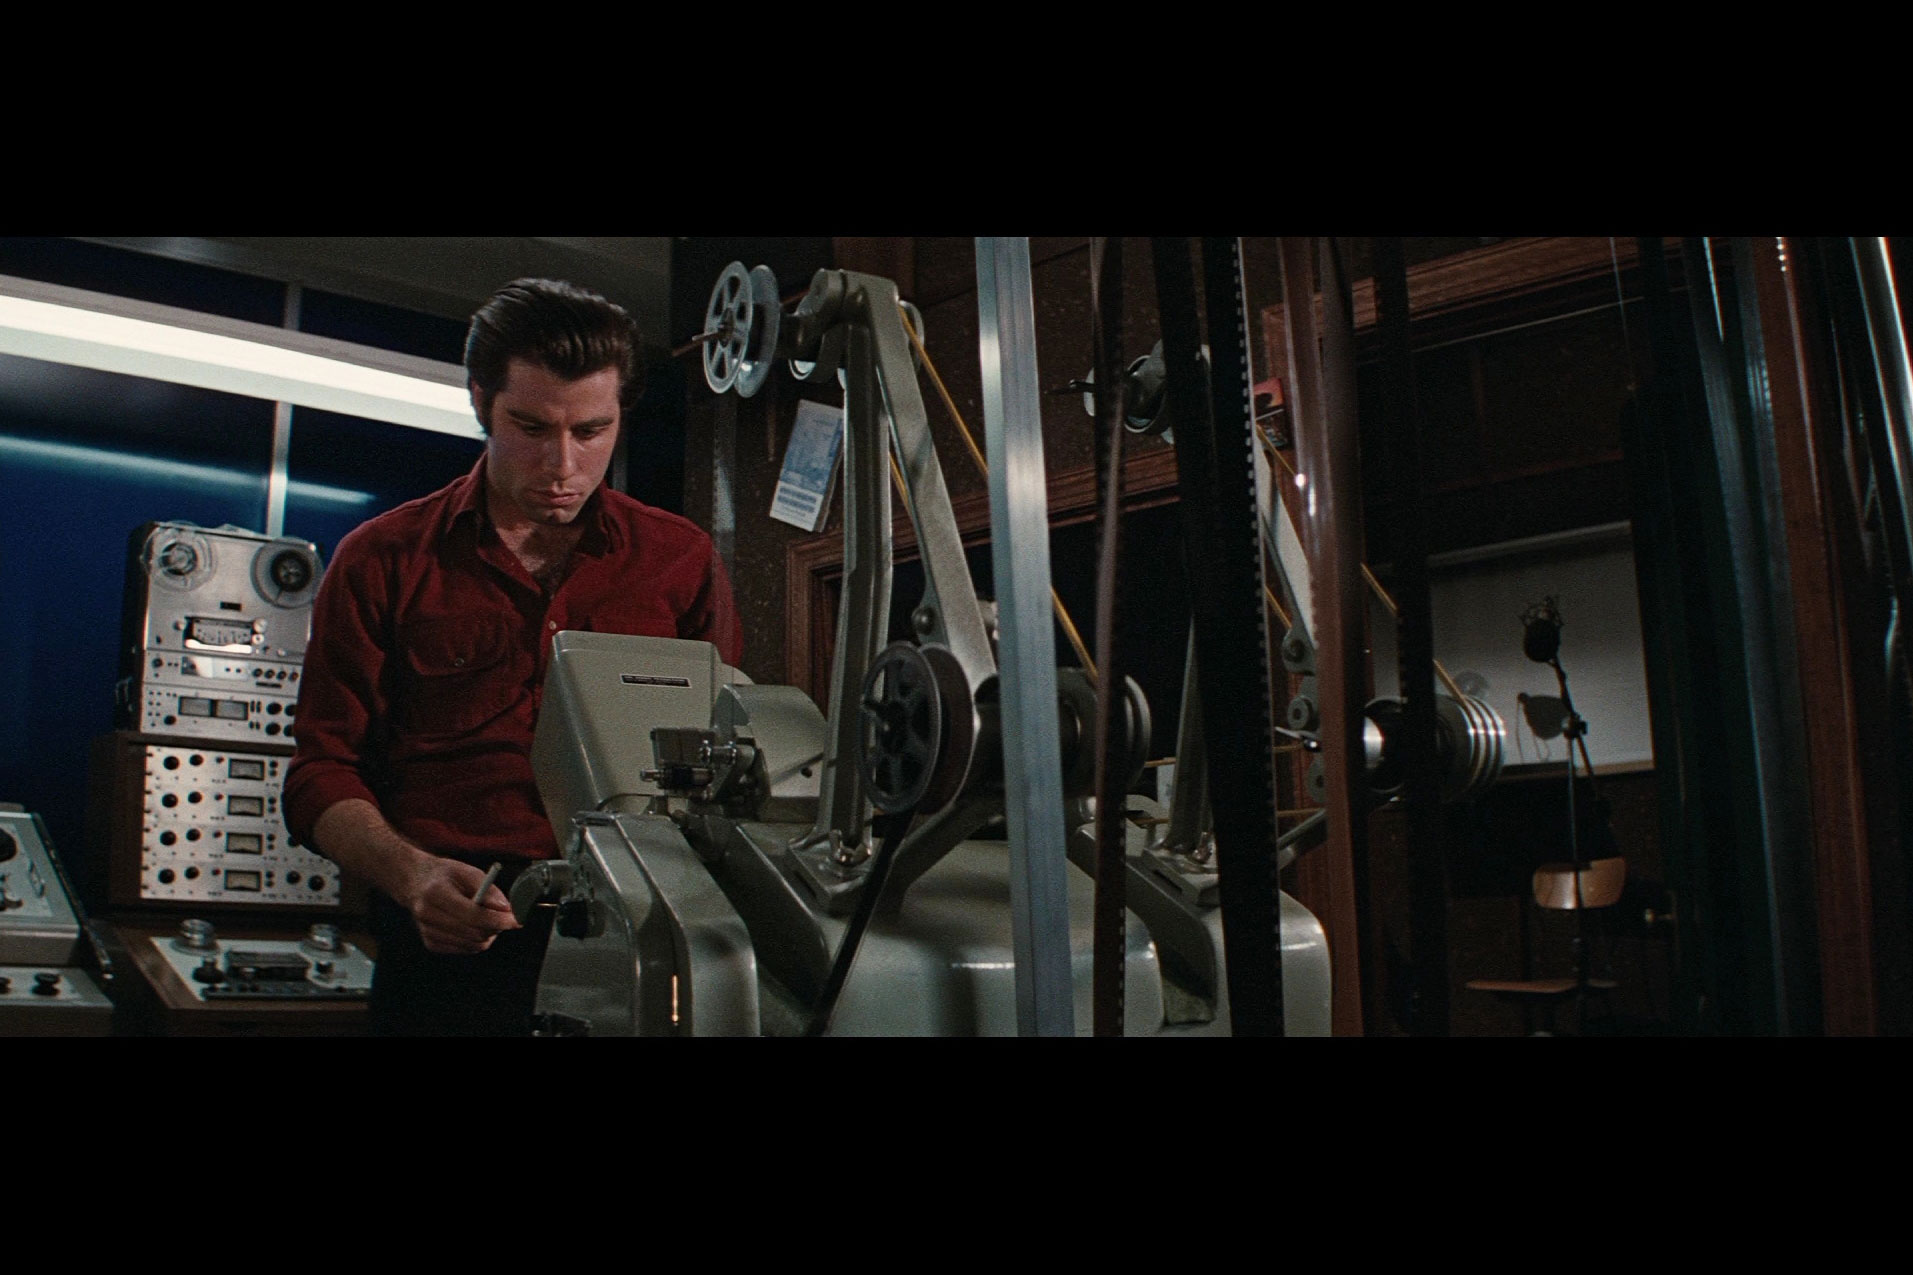 john travolta standing behind a projector in a projection booth. 